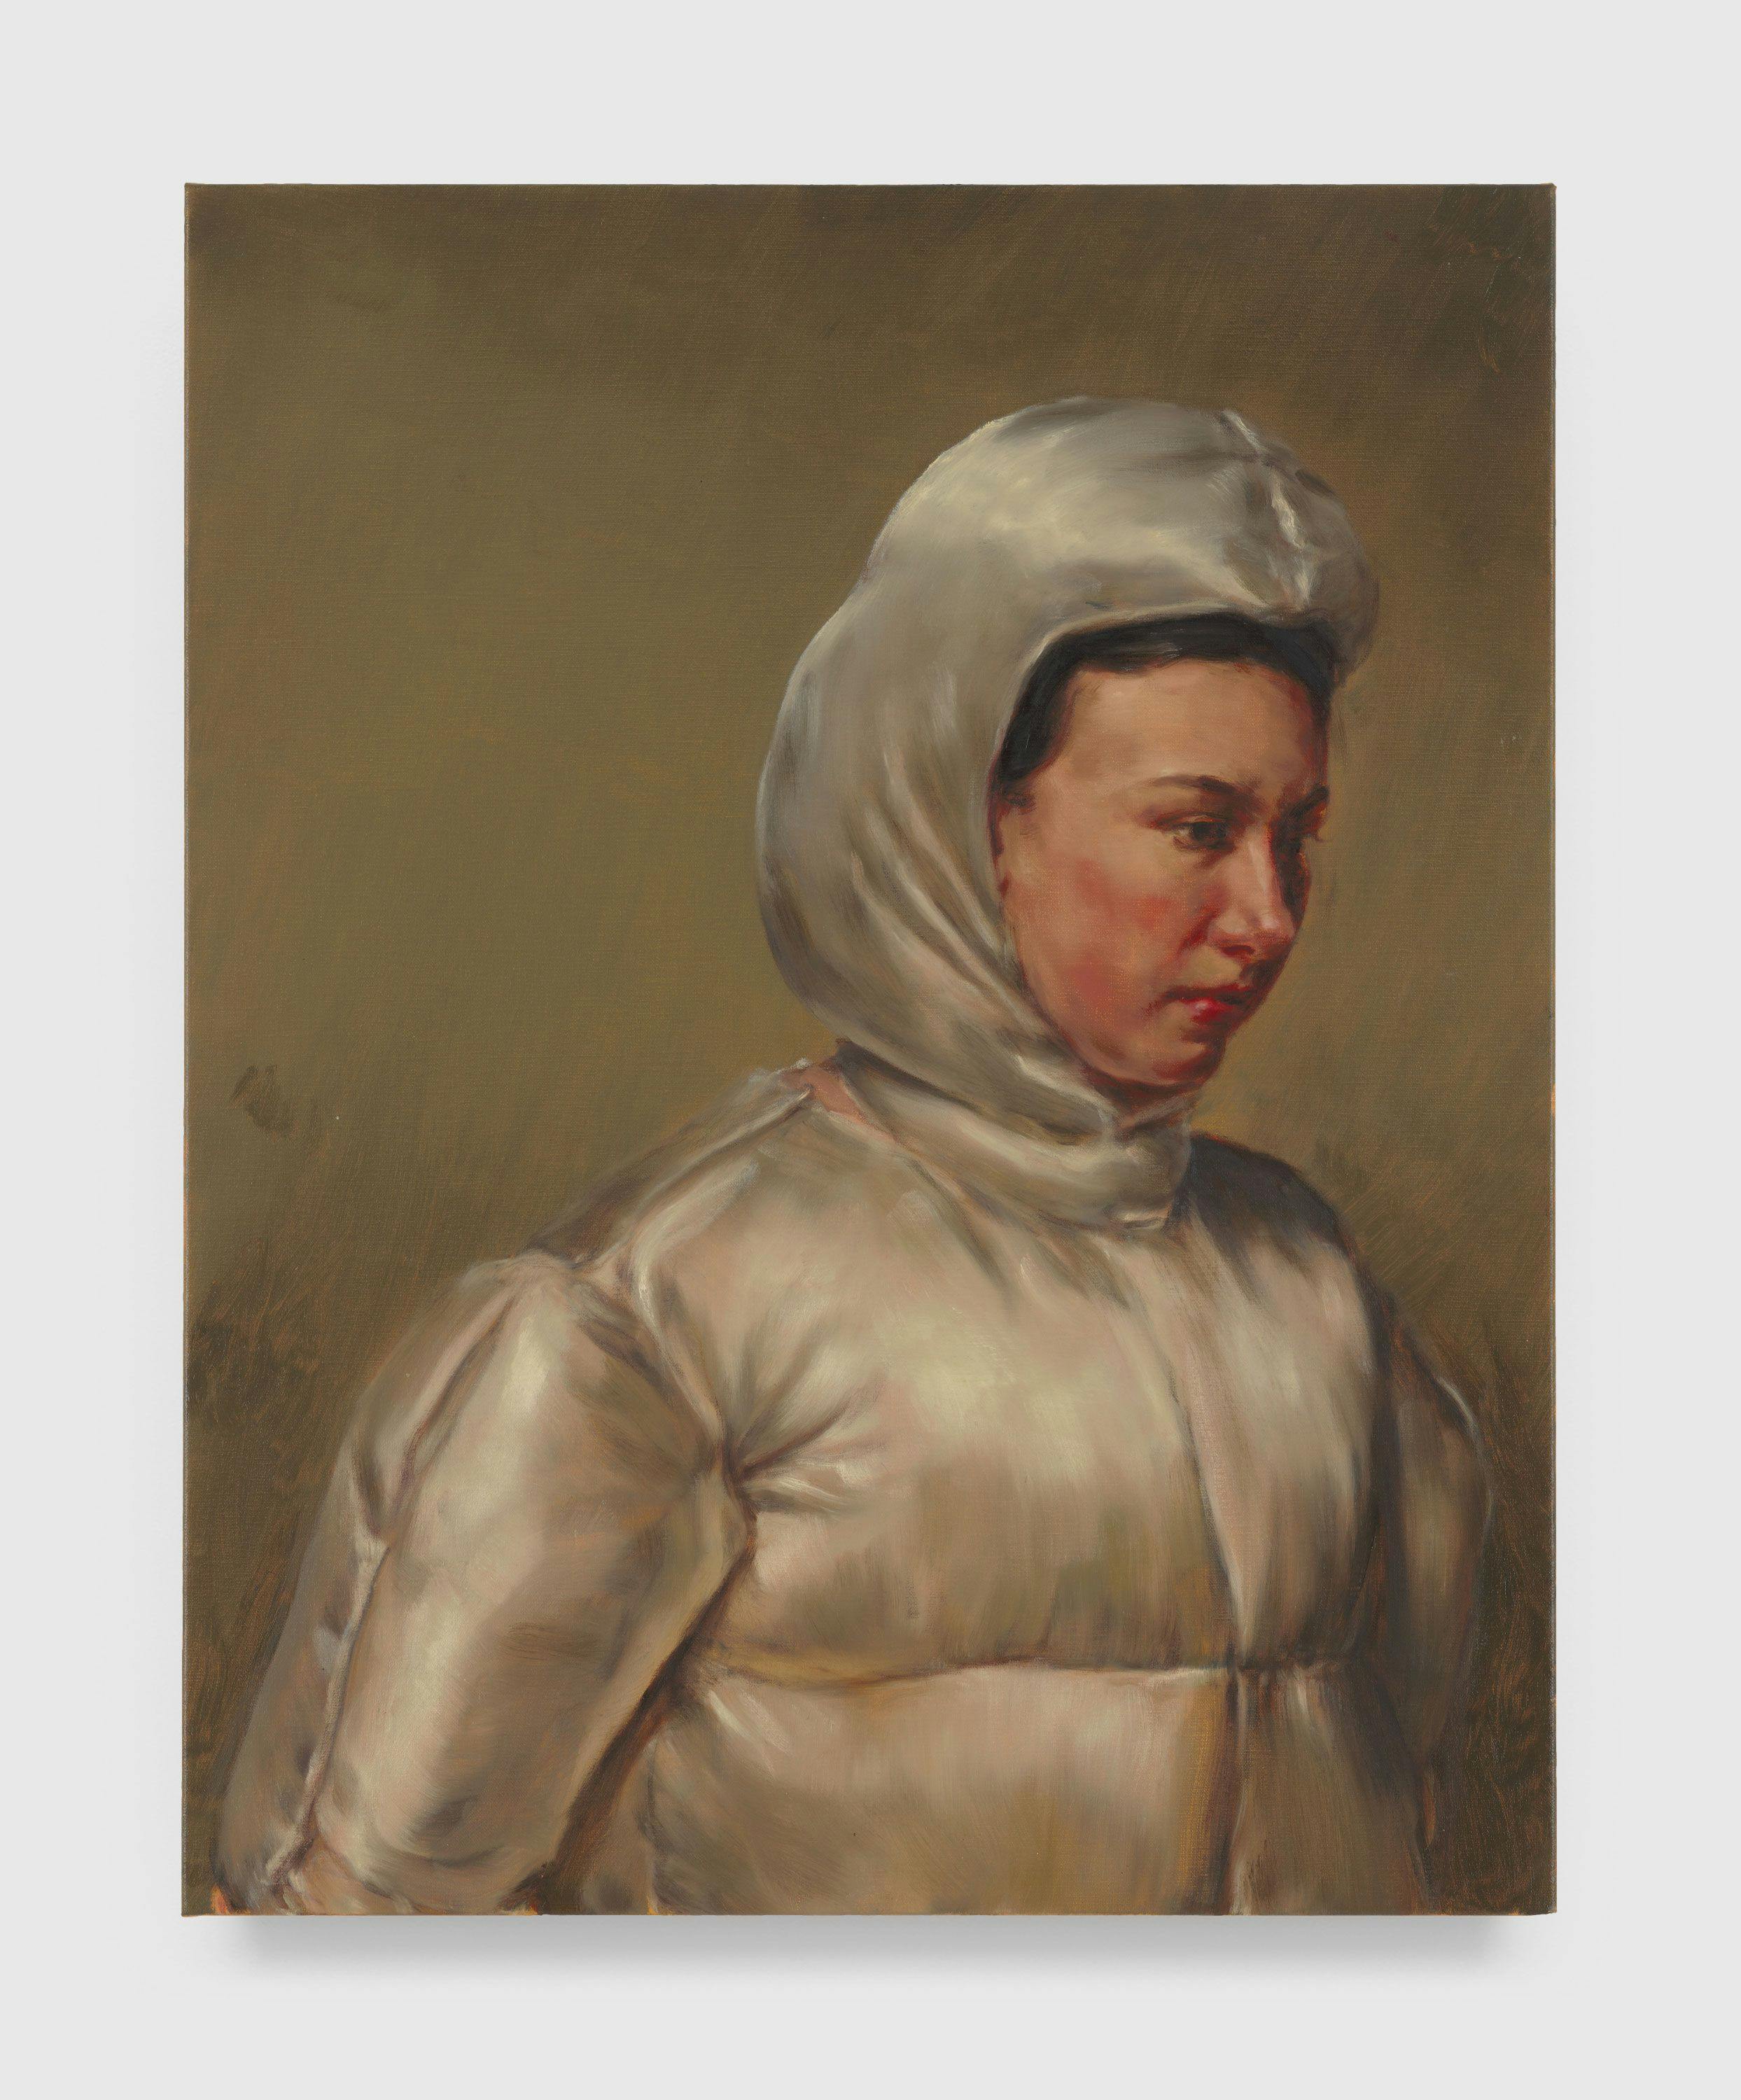 A painting by Michaël Borremans, titled The Commuter, dated 2021.